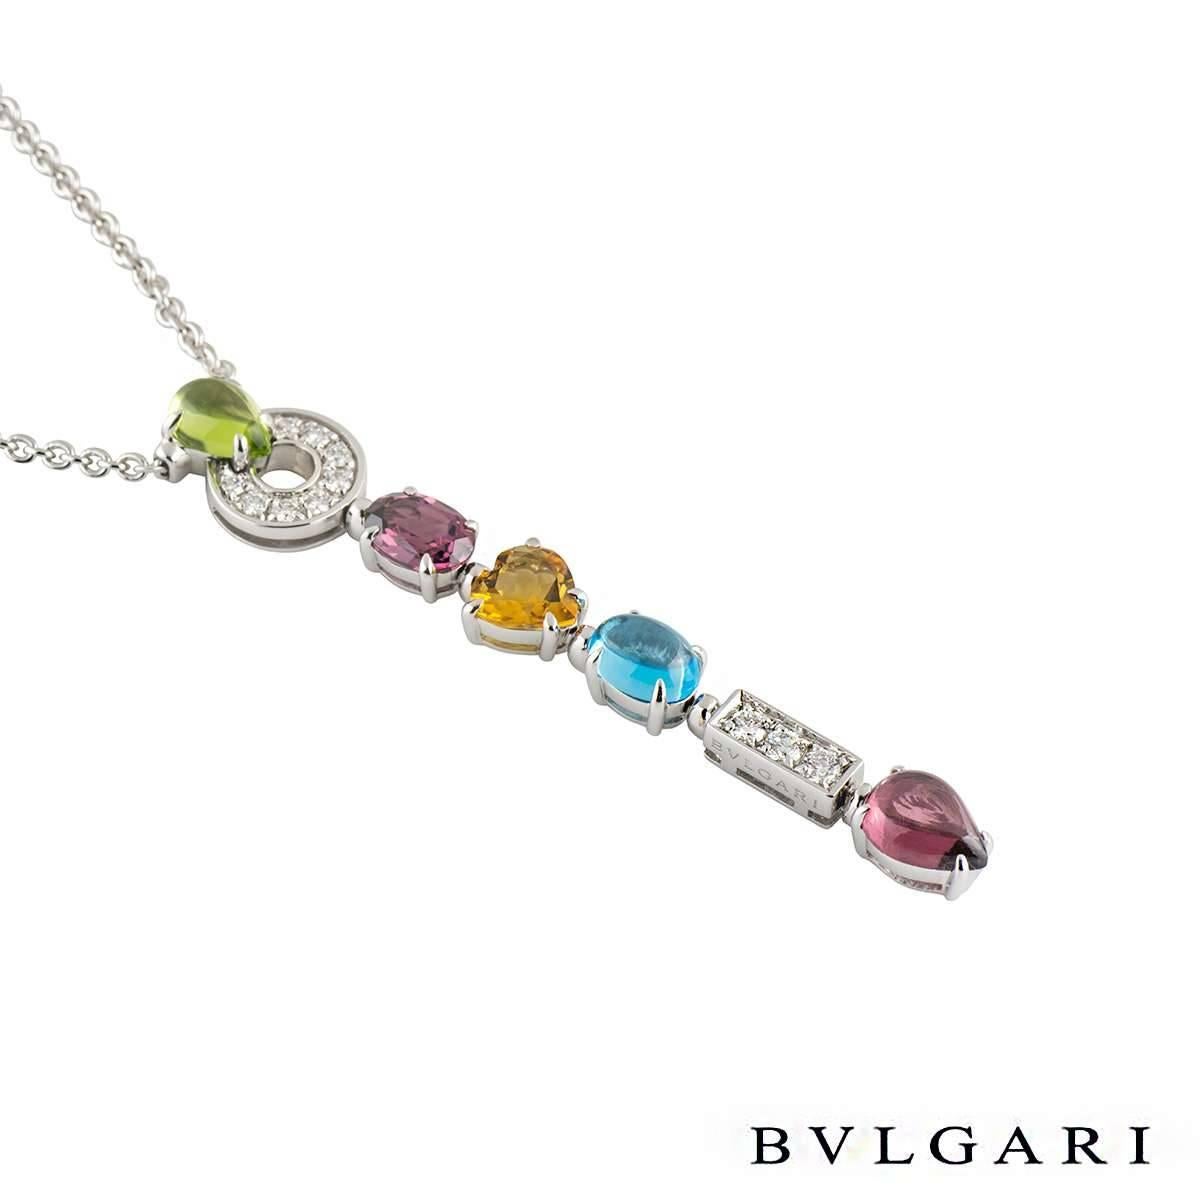 An 18k white gold multi gemstone and diamond necklace from the Bvlgari Allegra collection. The necklace is composed of a cabochon cut peridot joined onto a diamond pave set circular motif suspending a single oval cut rhodonite garnet, a heart cut